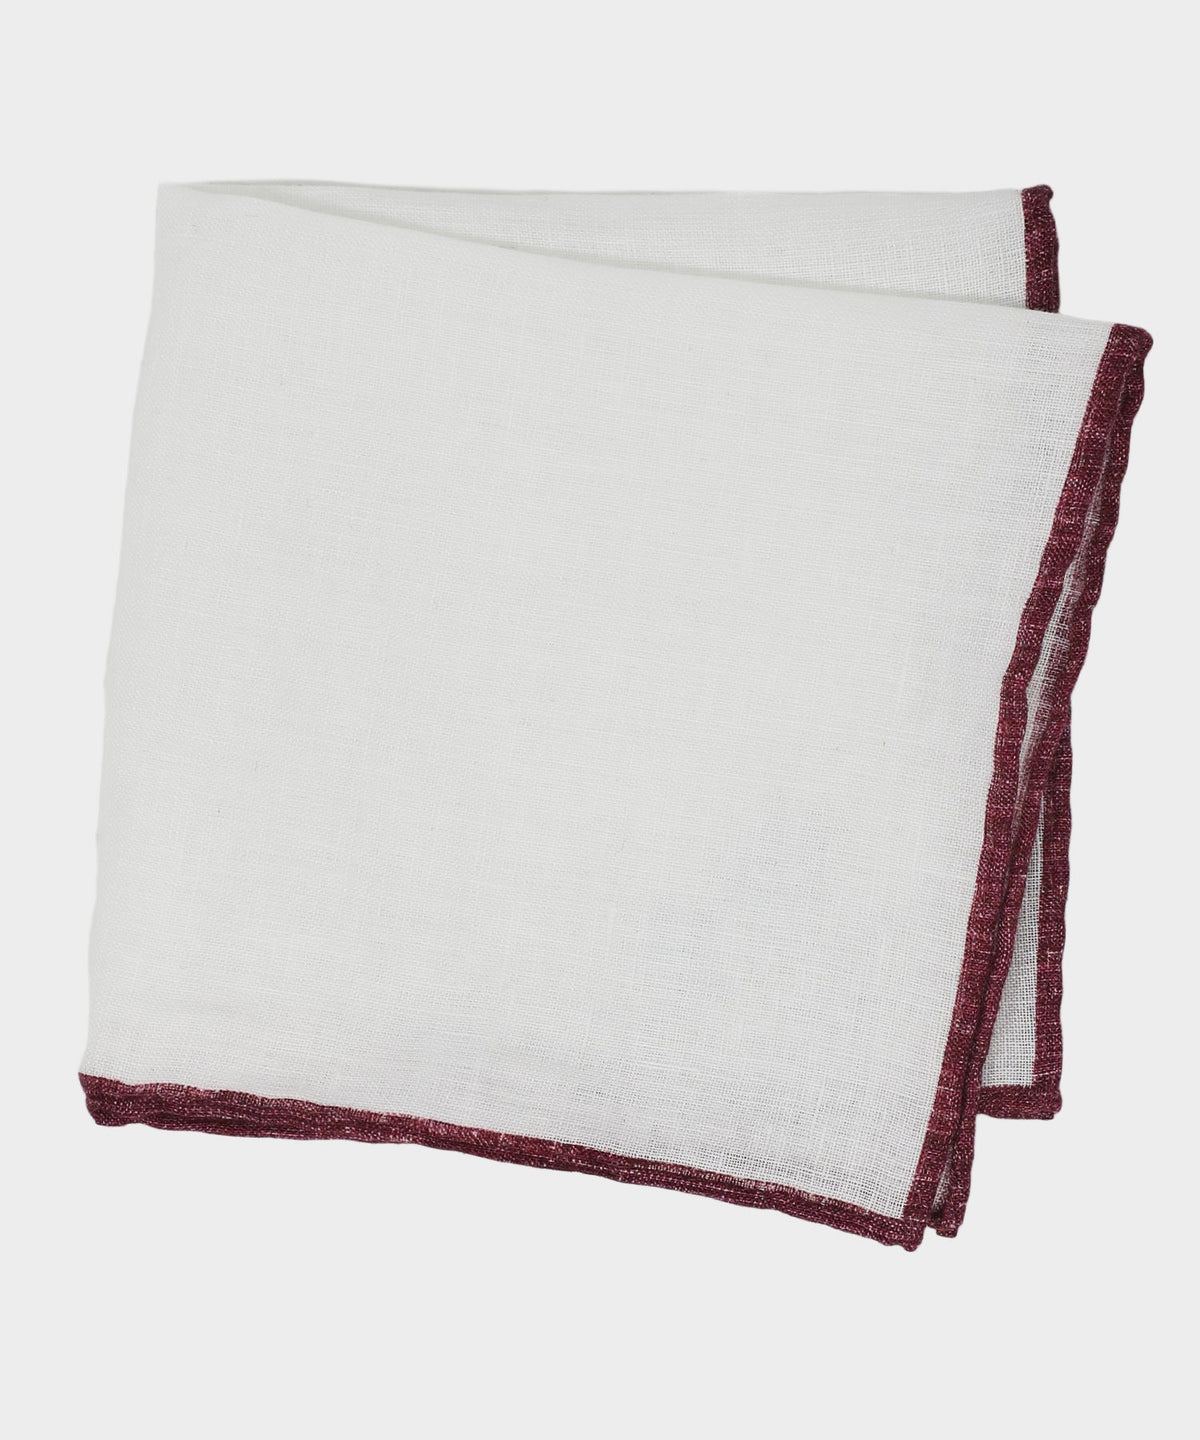 Italian Tipped Linen Pocket Square in Maroon